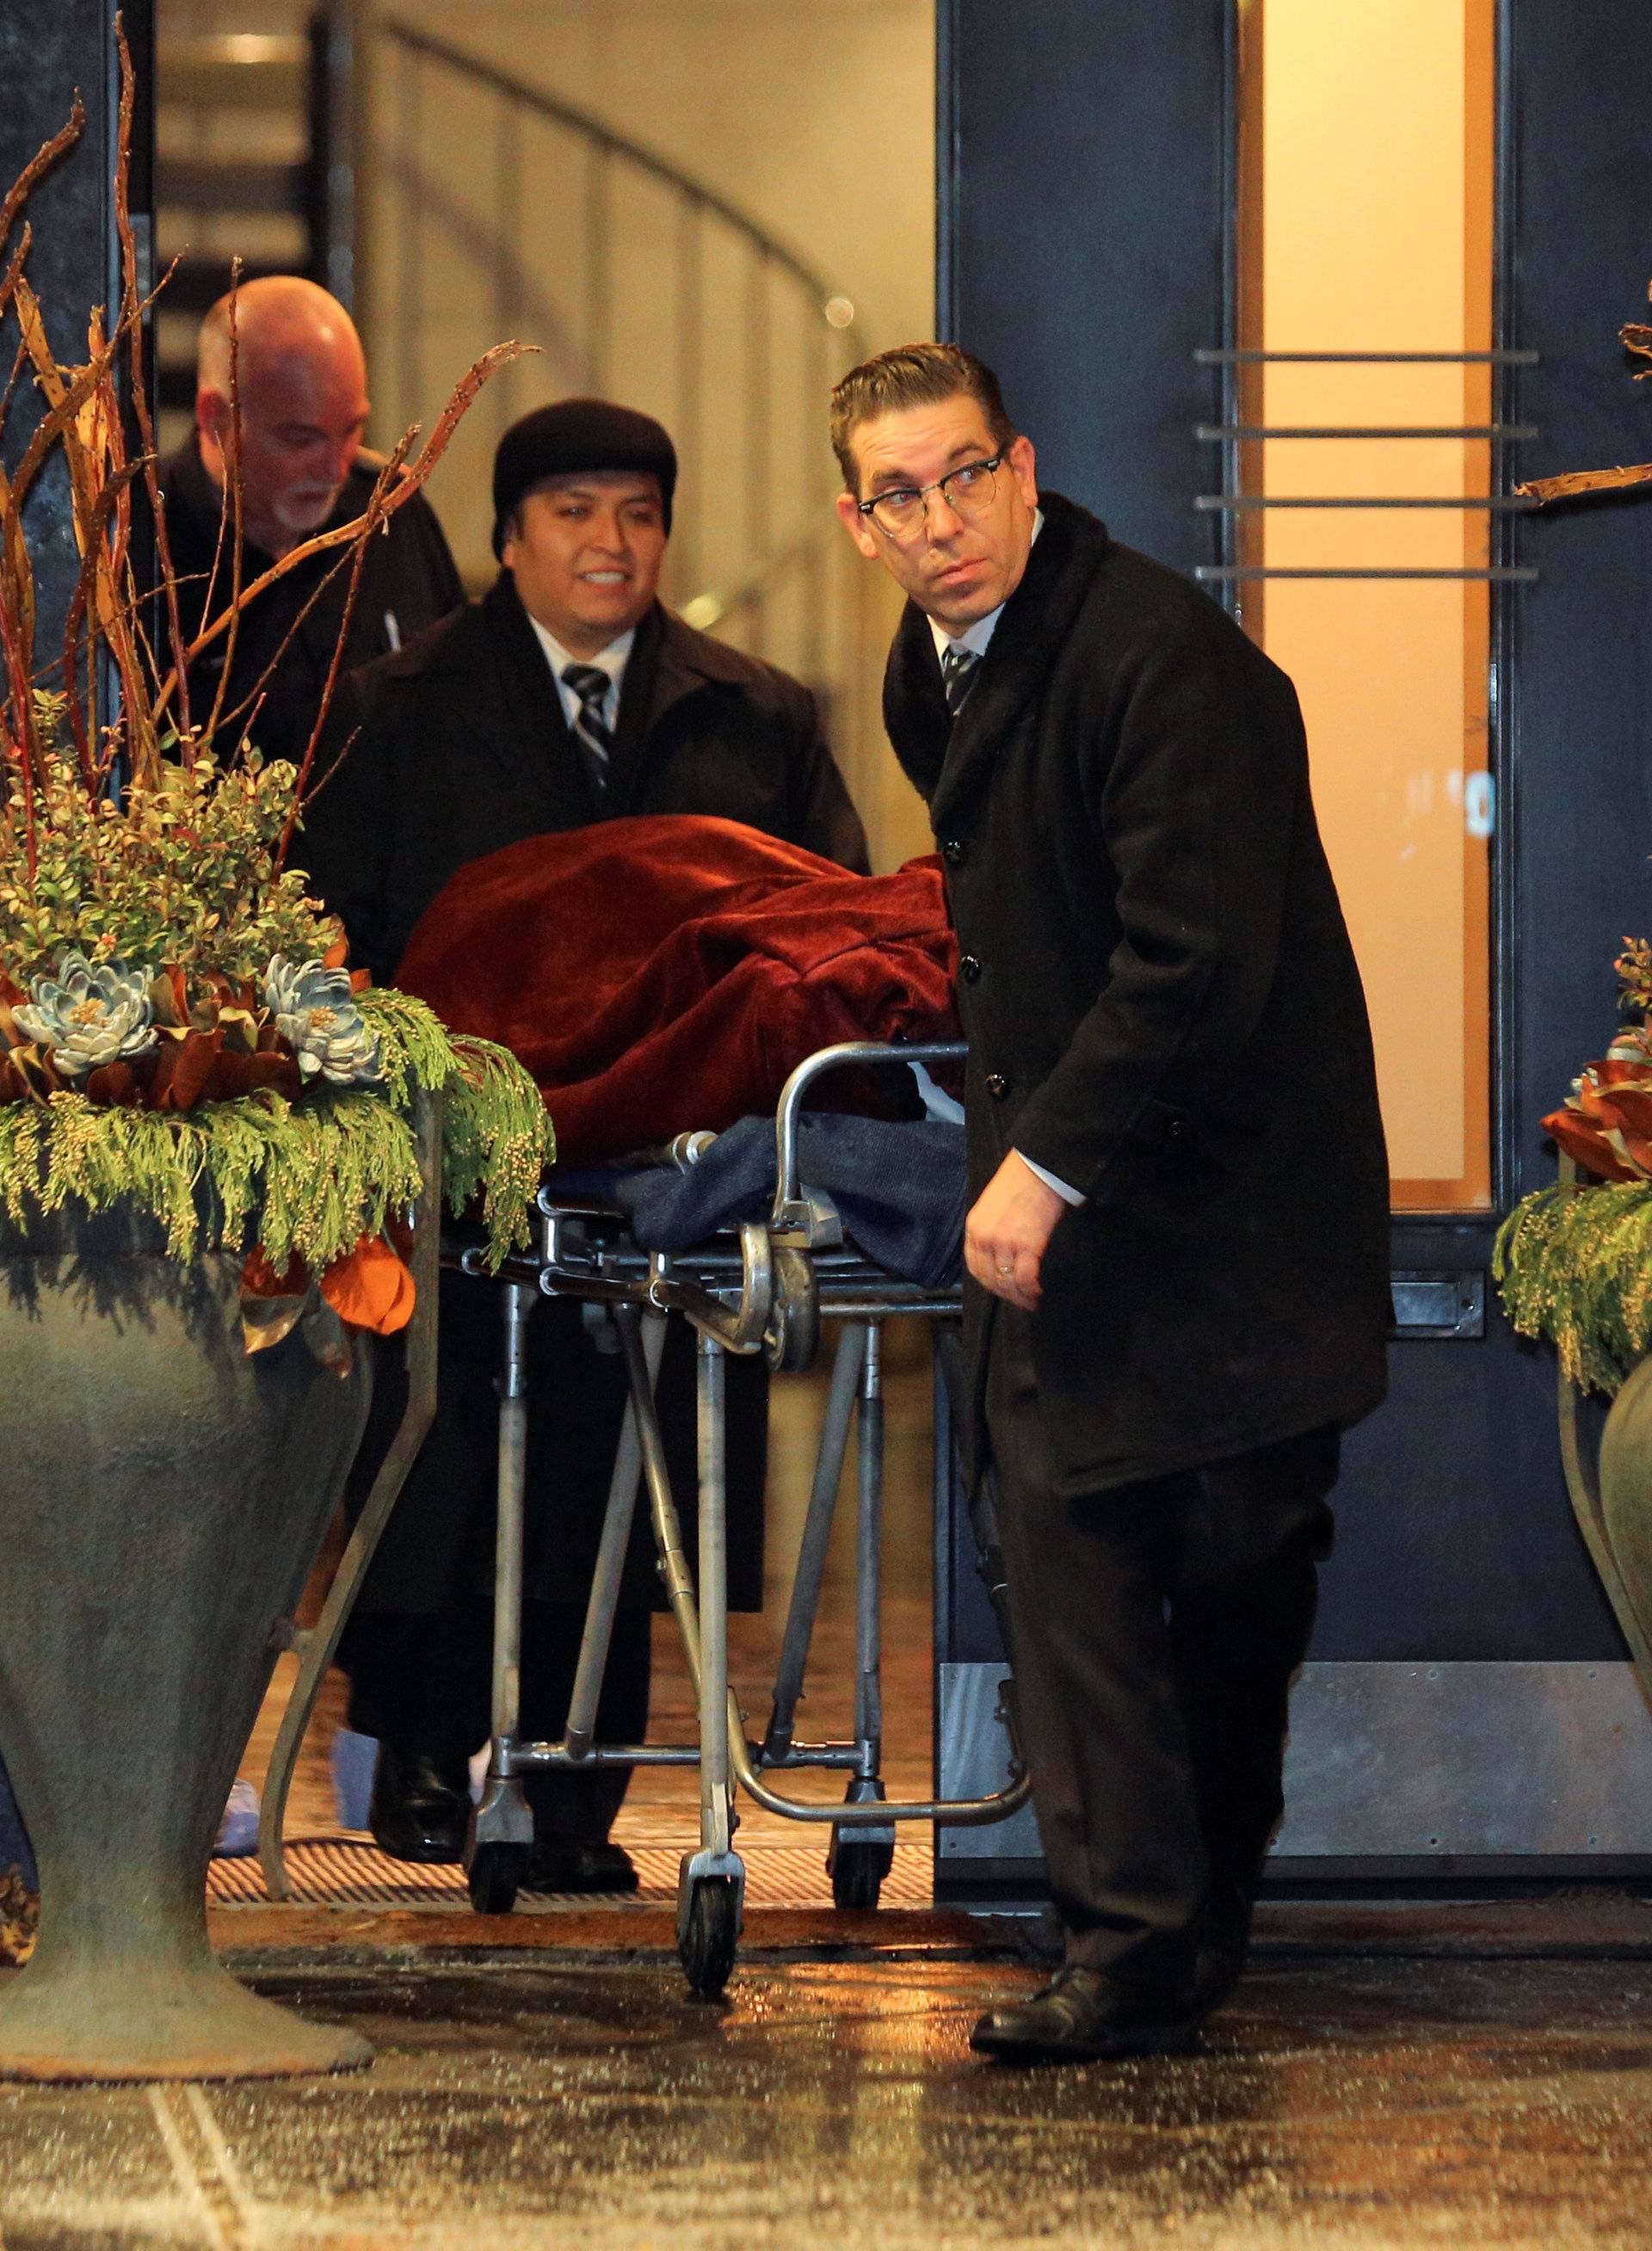 One of two bodies is removed from the home of billionaire founder of Canadian pharmaceutical firm Apotex in Toronto